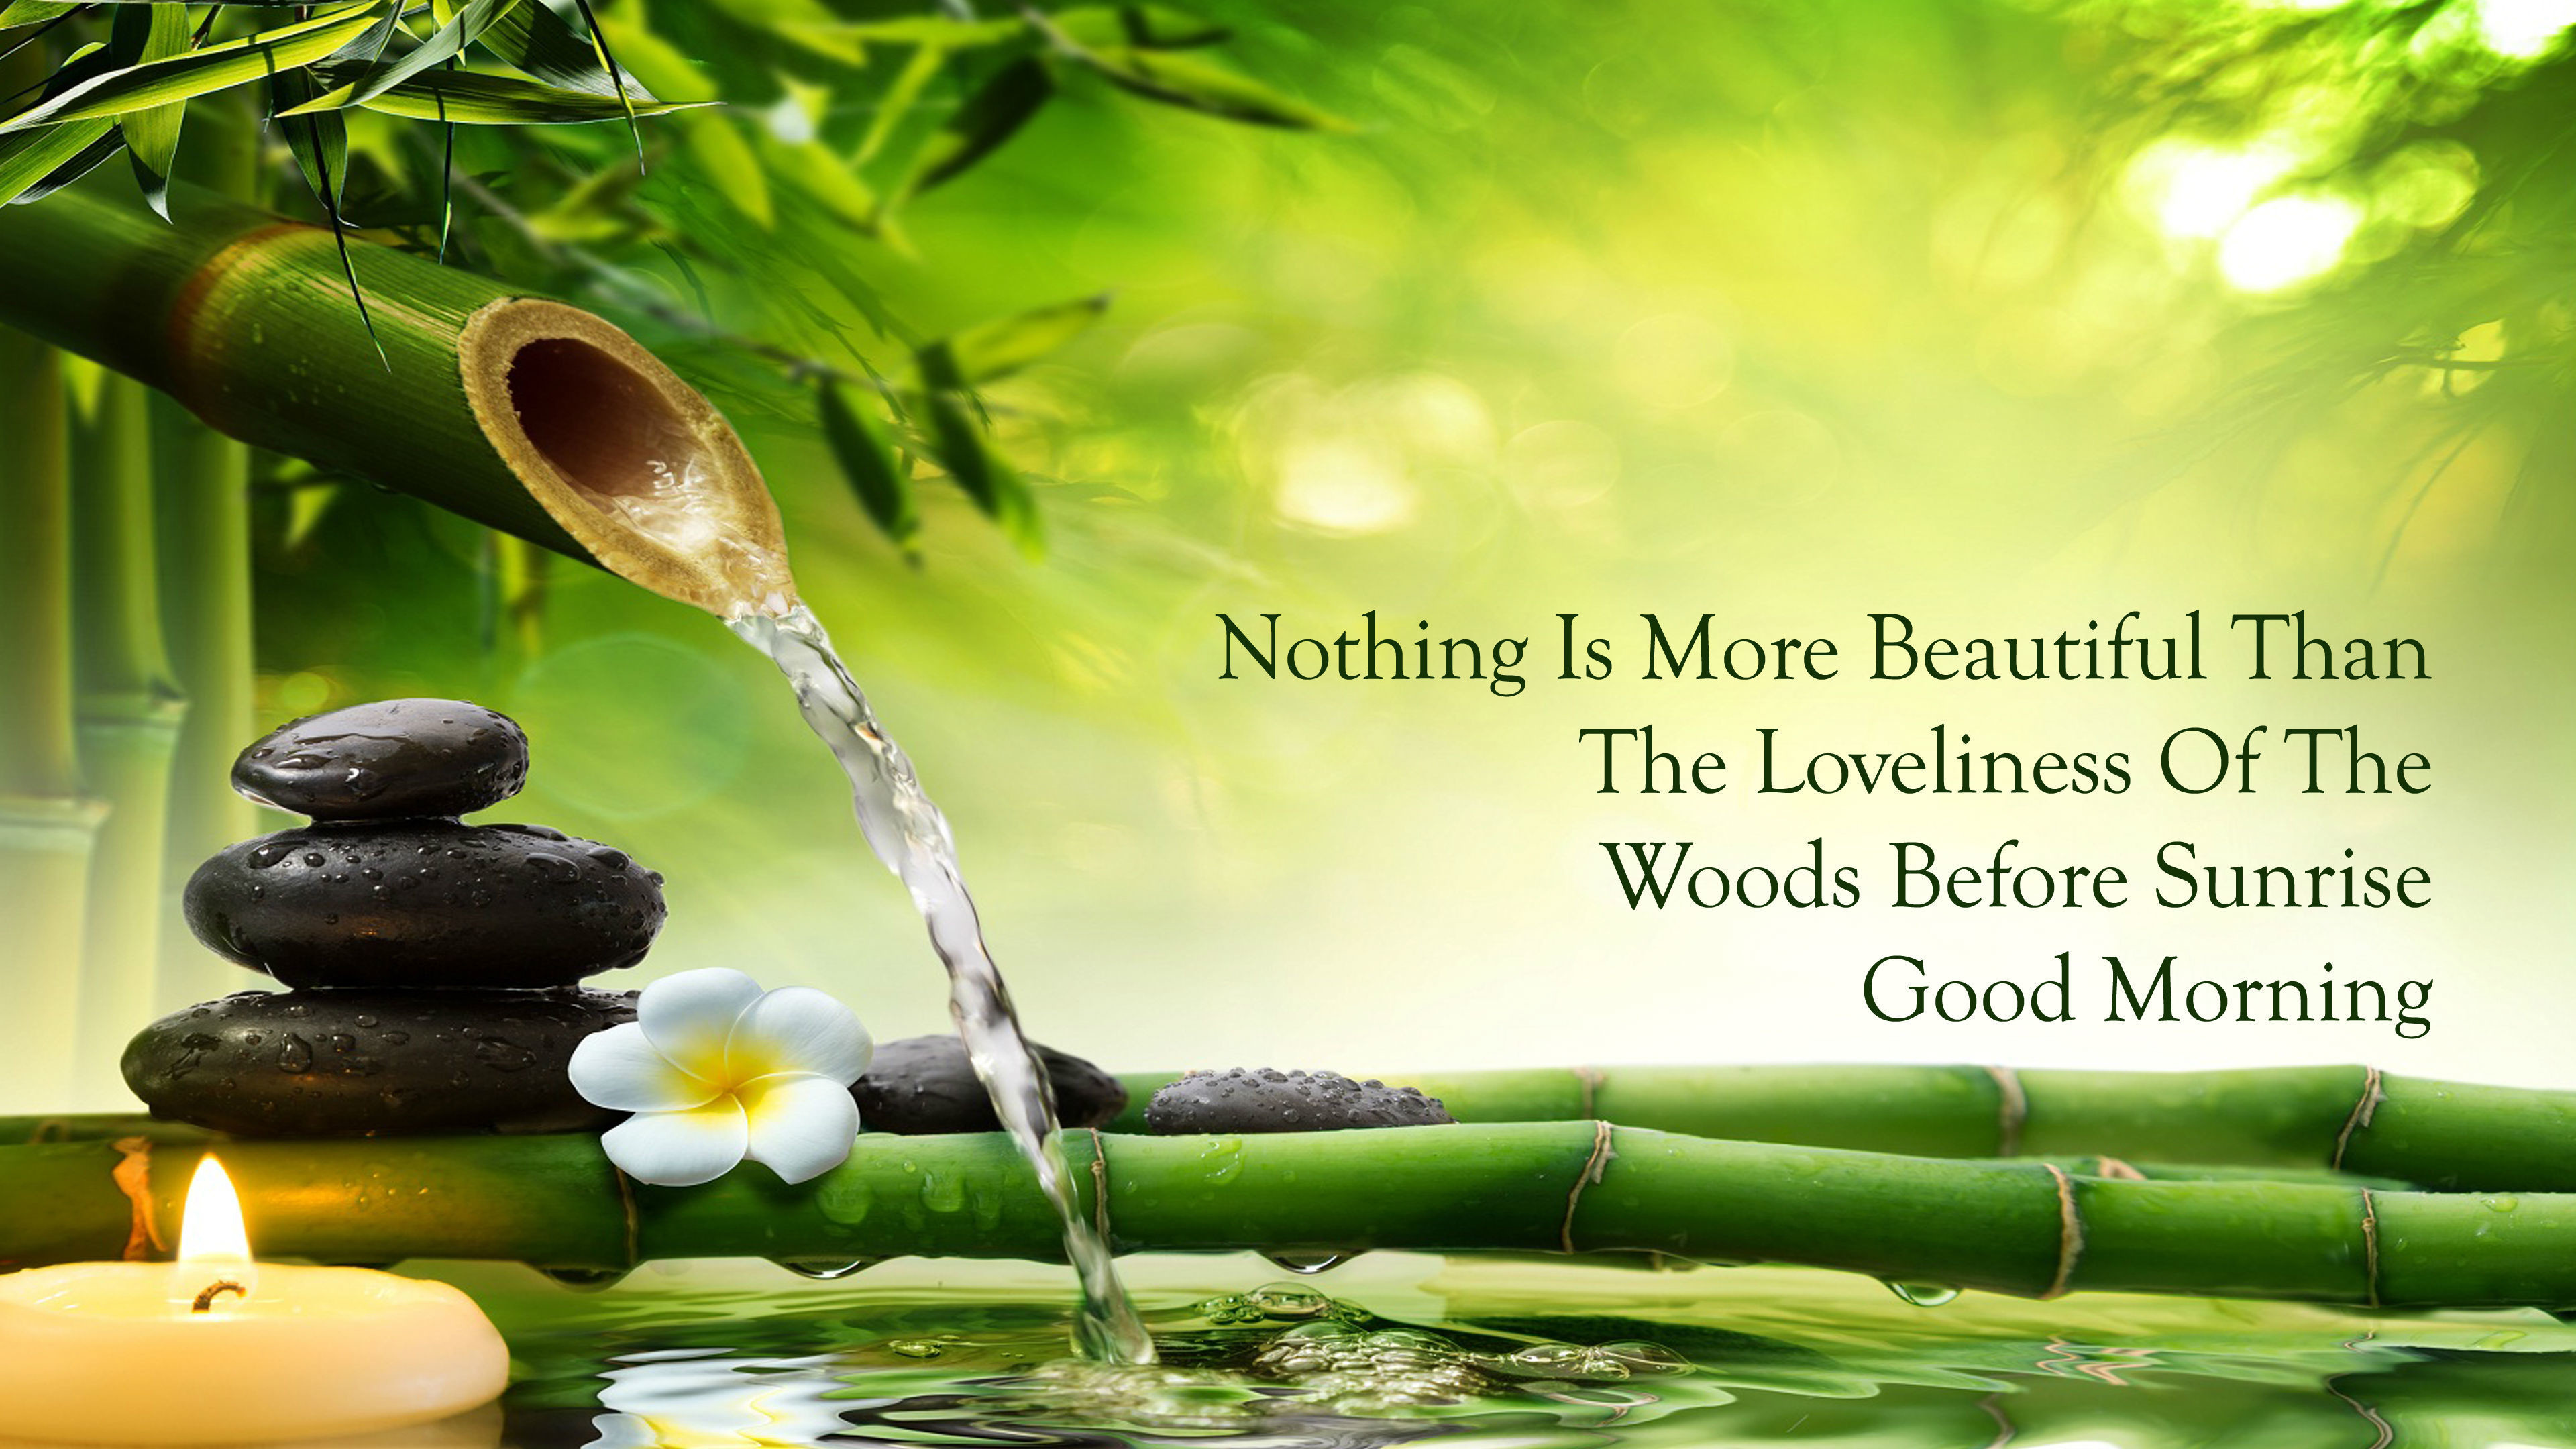 Nature Wallpaper With Quotes (61+ Images)